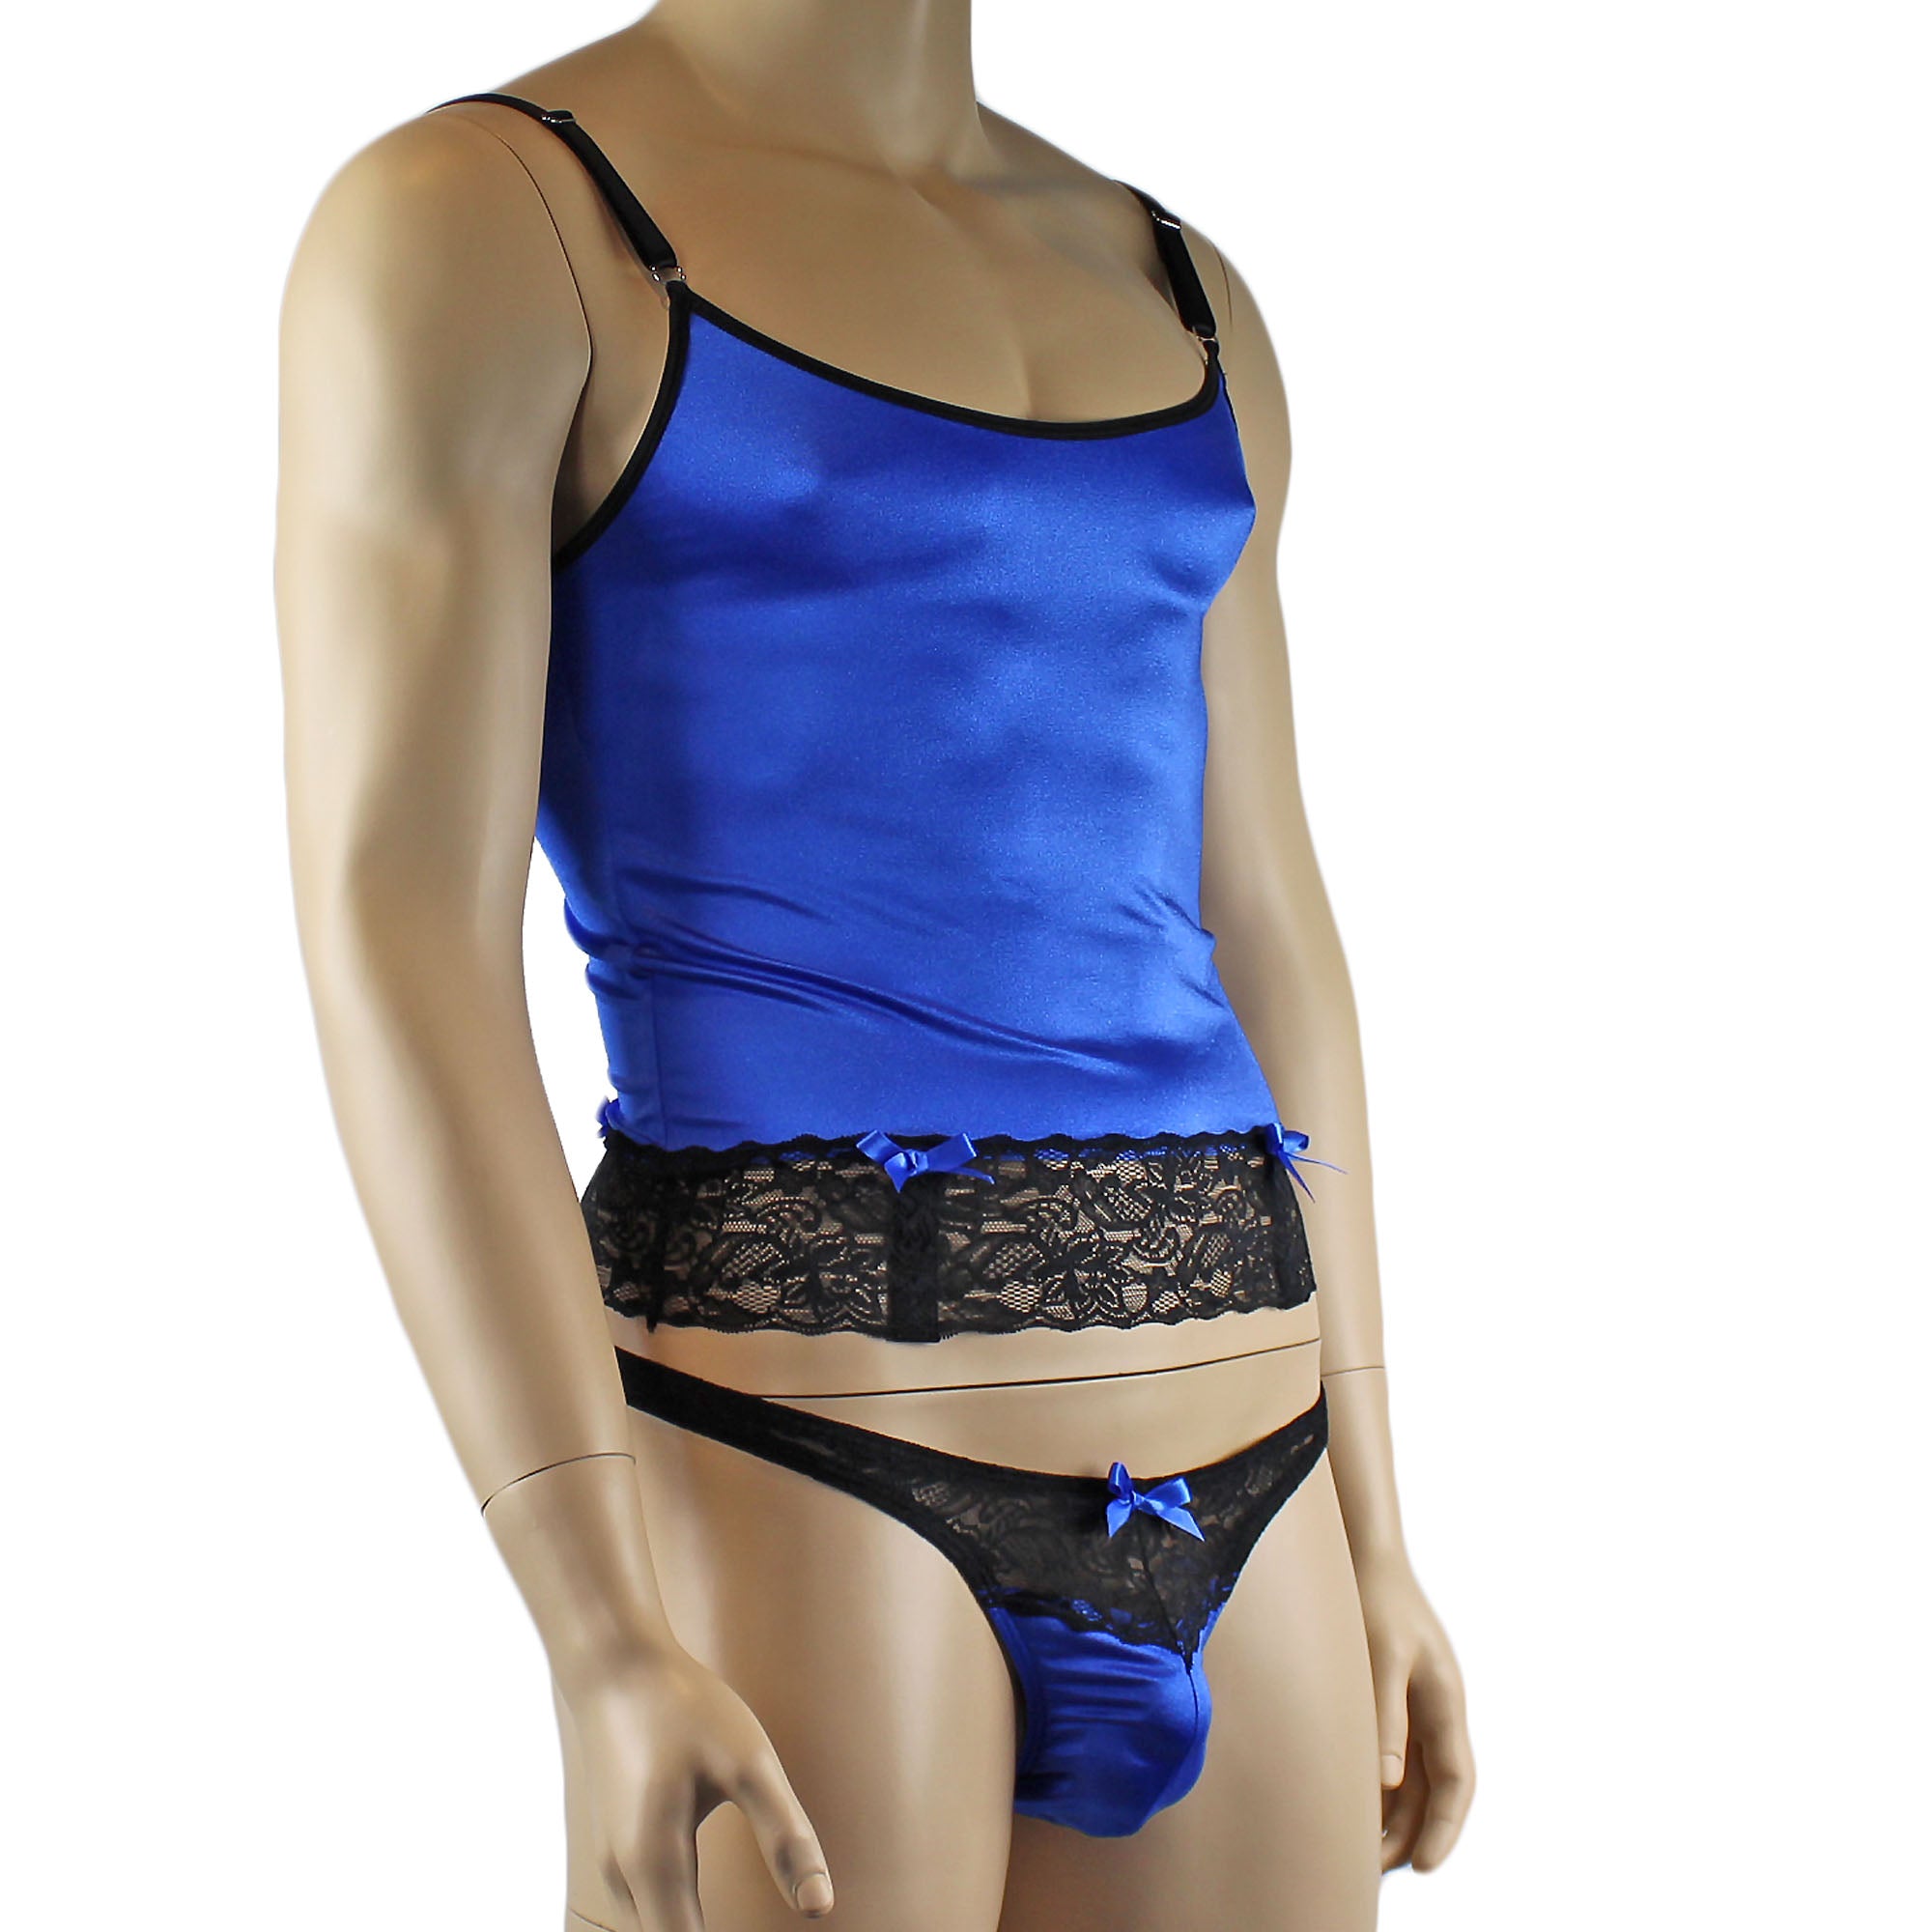 Mens Joanne Camisole Bustier Garter Top with Thong & Stockings Sizes up to 3XL Blue and Black Lace